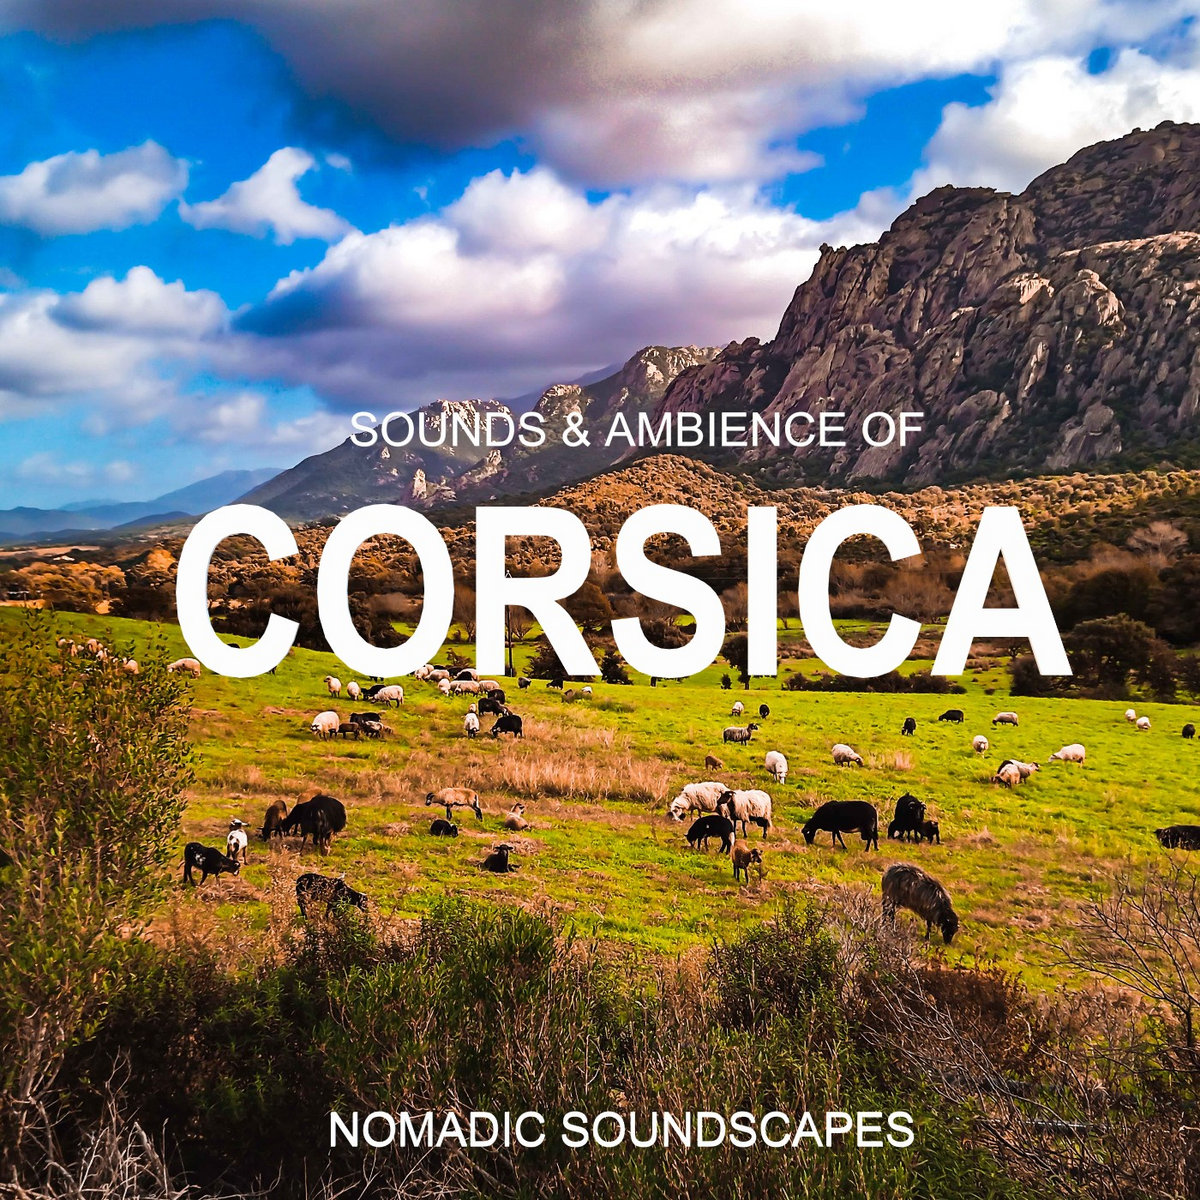 Immerse Yourself in the Sounds and Ambiences of Corsica